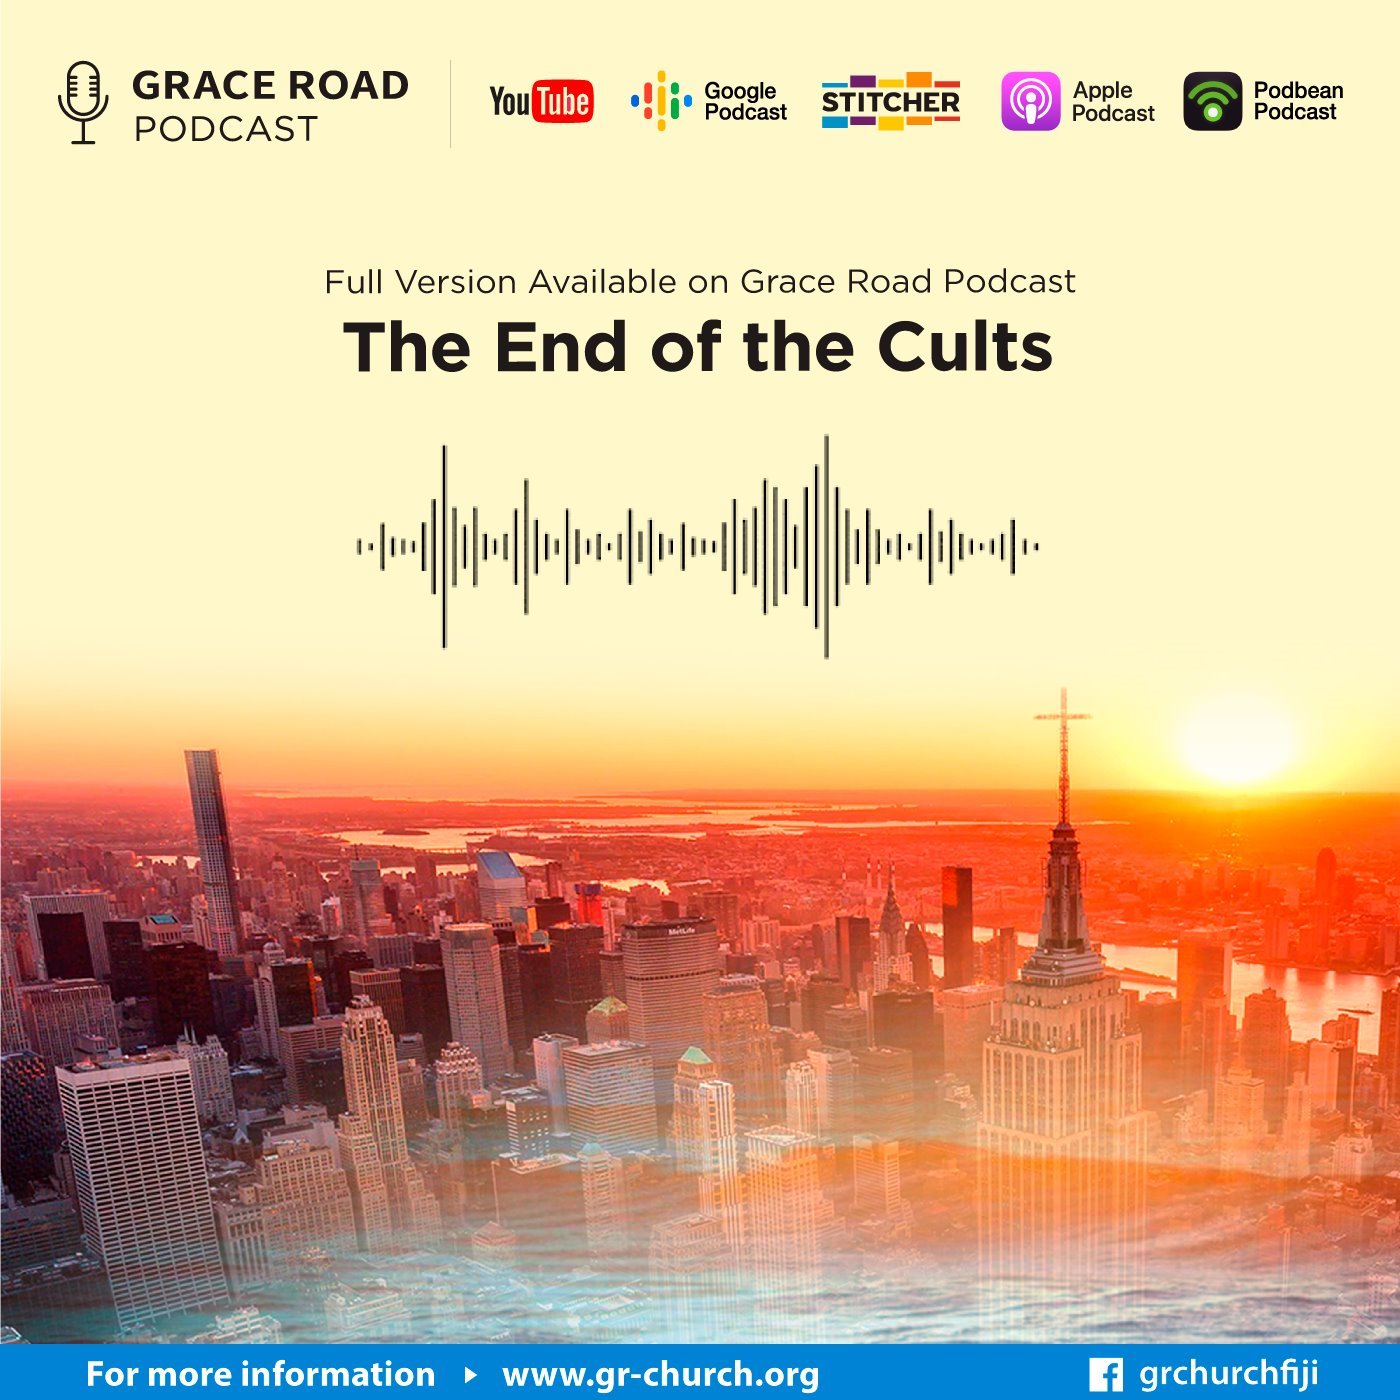 The End of the Cults